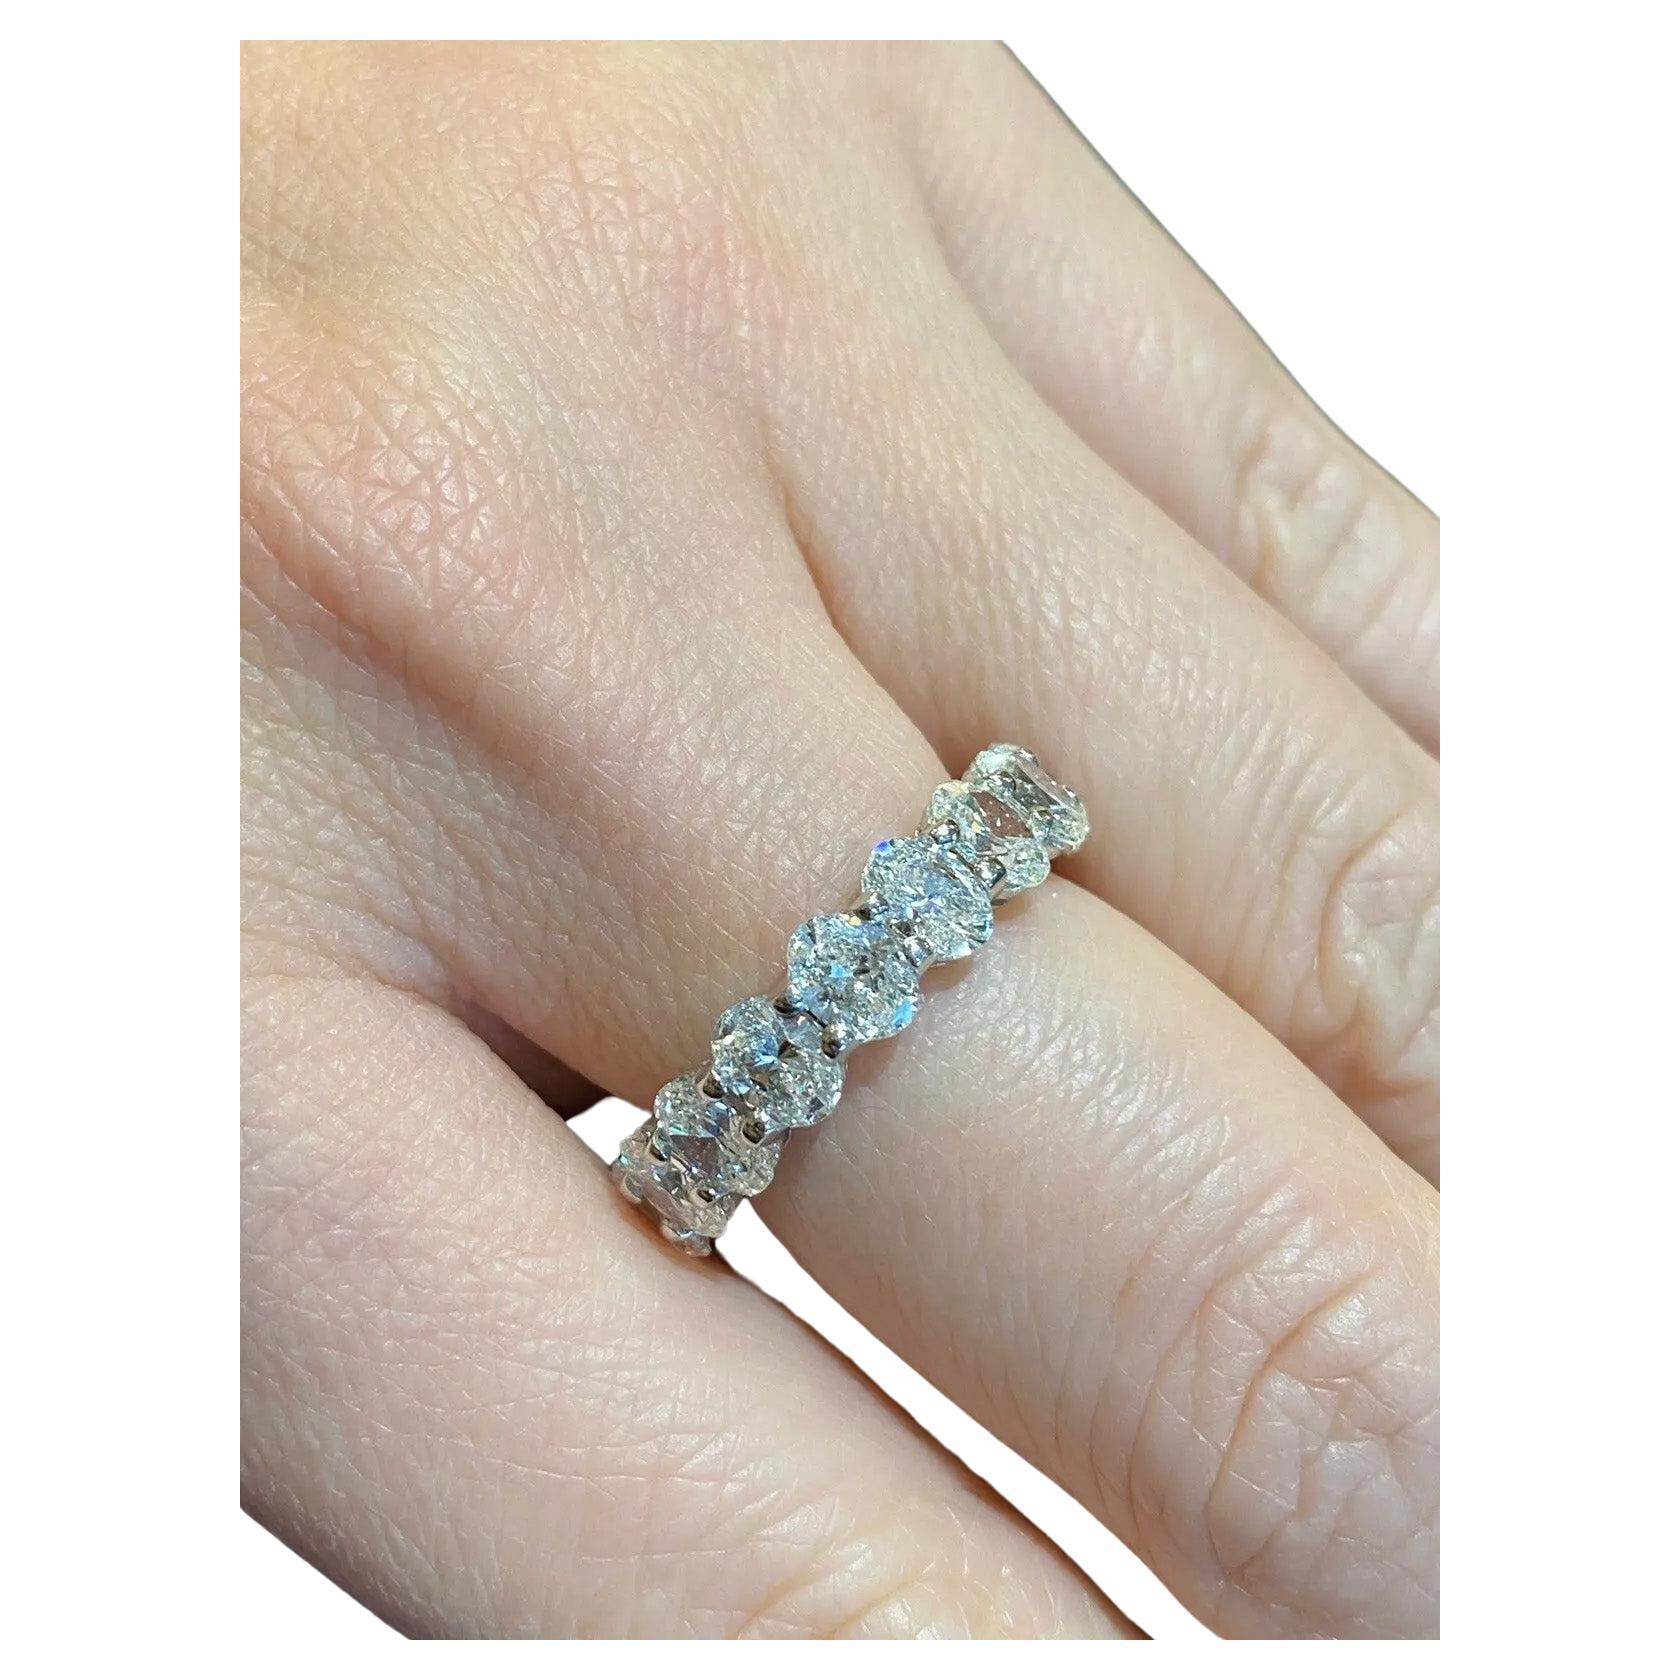 5.25 Carat Total Weight Oval Diamond Eternity Band Ring in Platinum